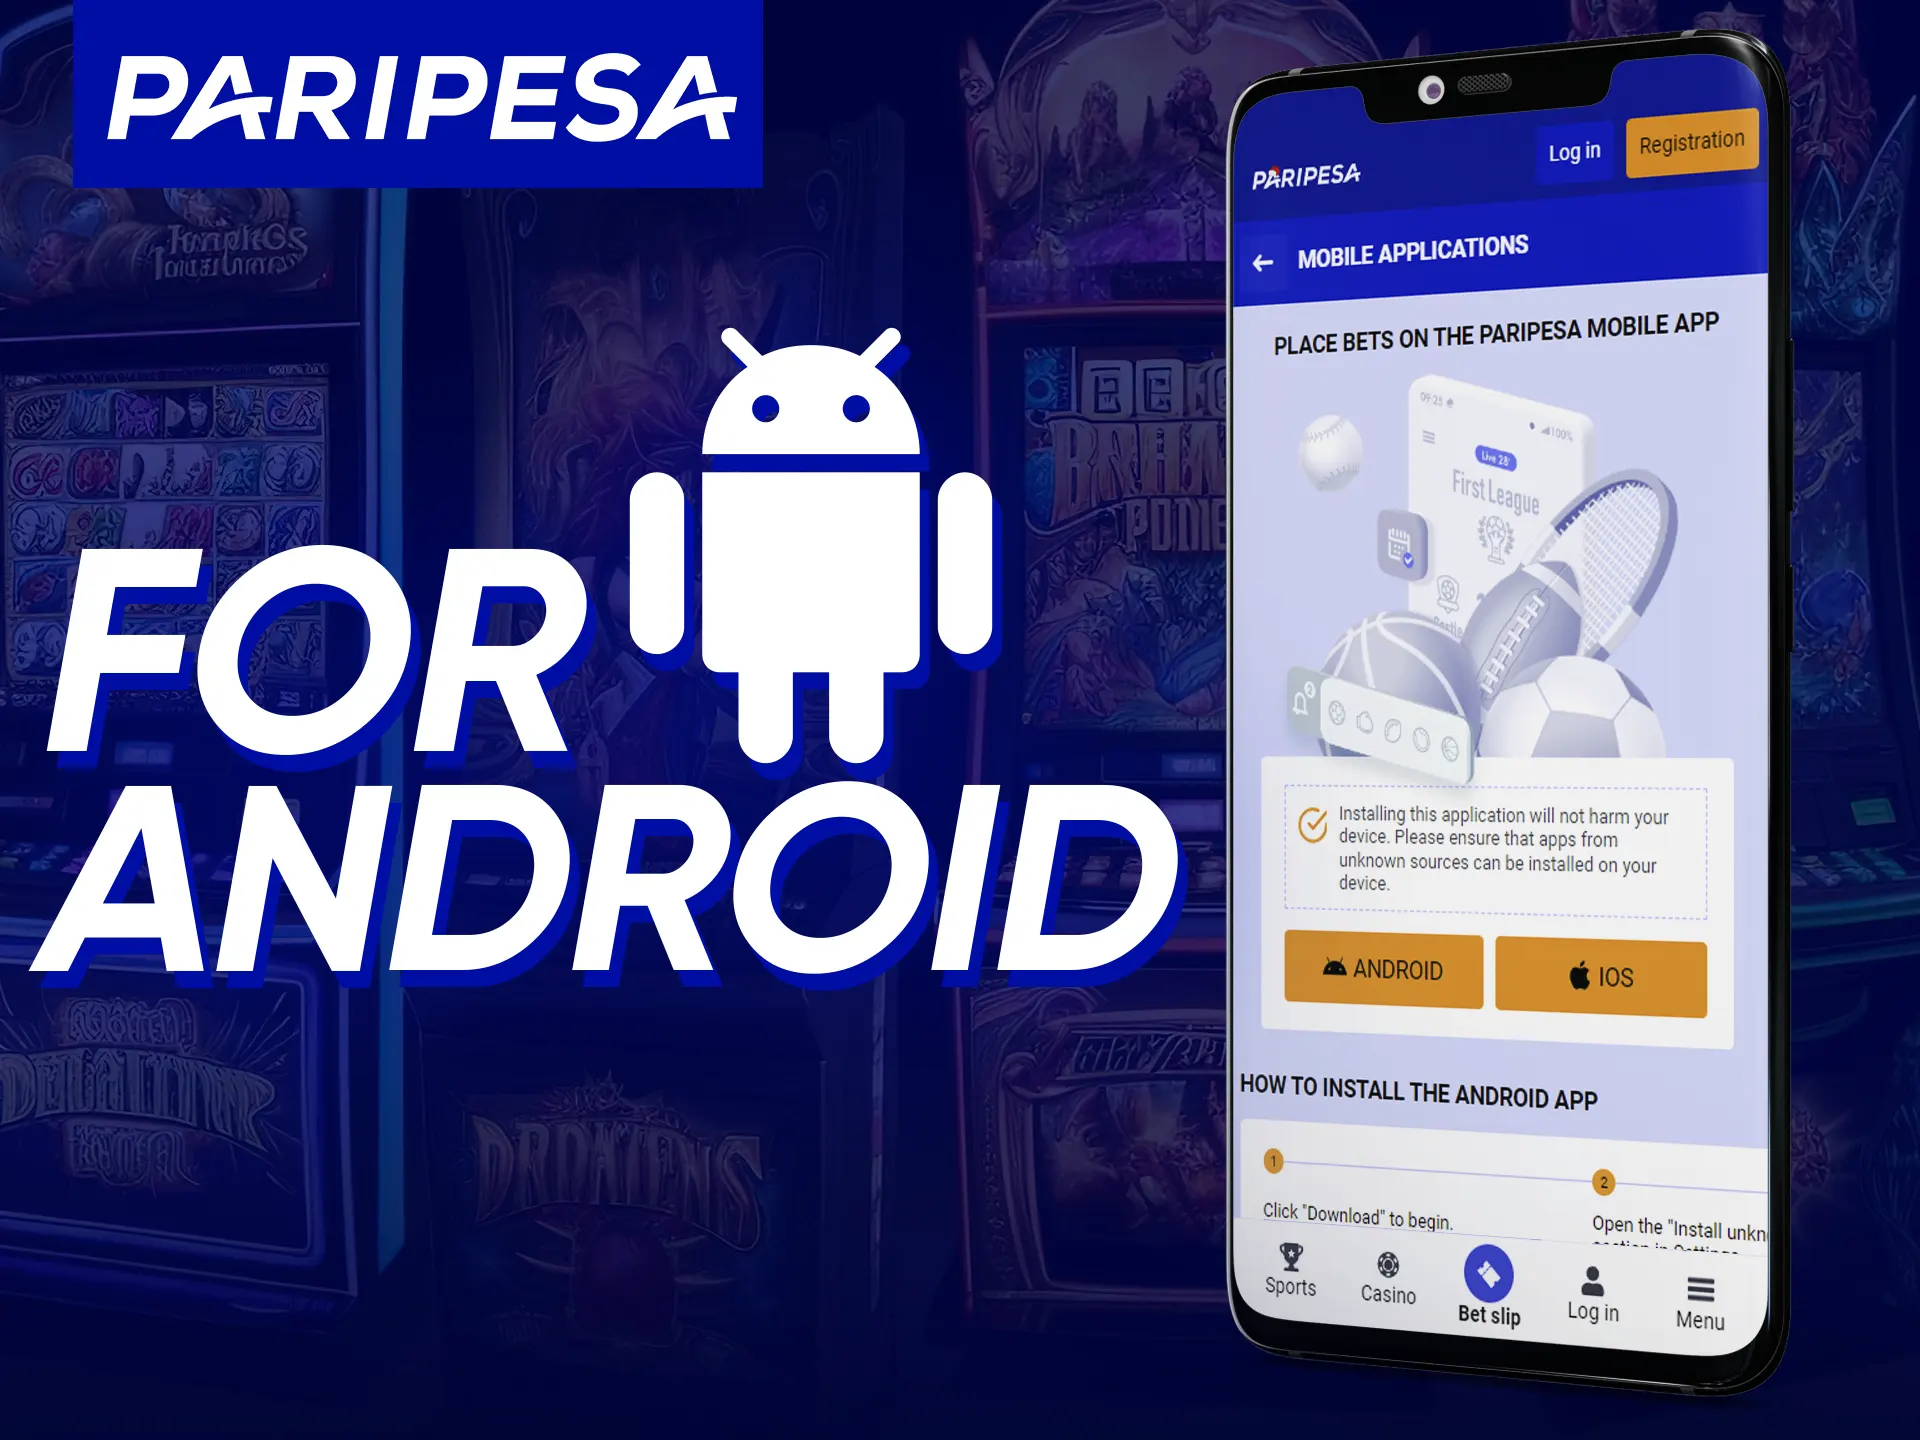 To install Paripesa app for Android, download from homepage, allow unknown sources, install and open.